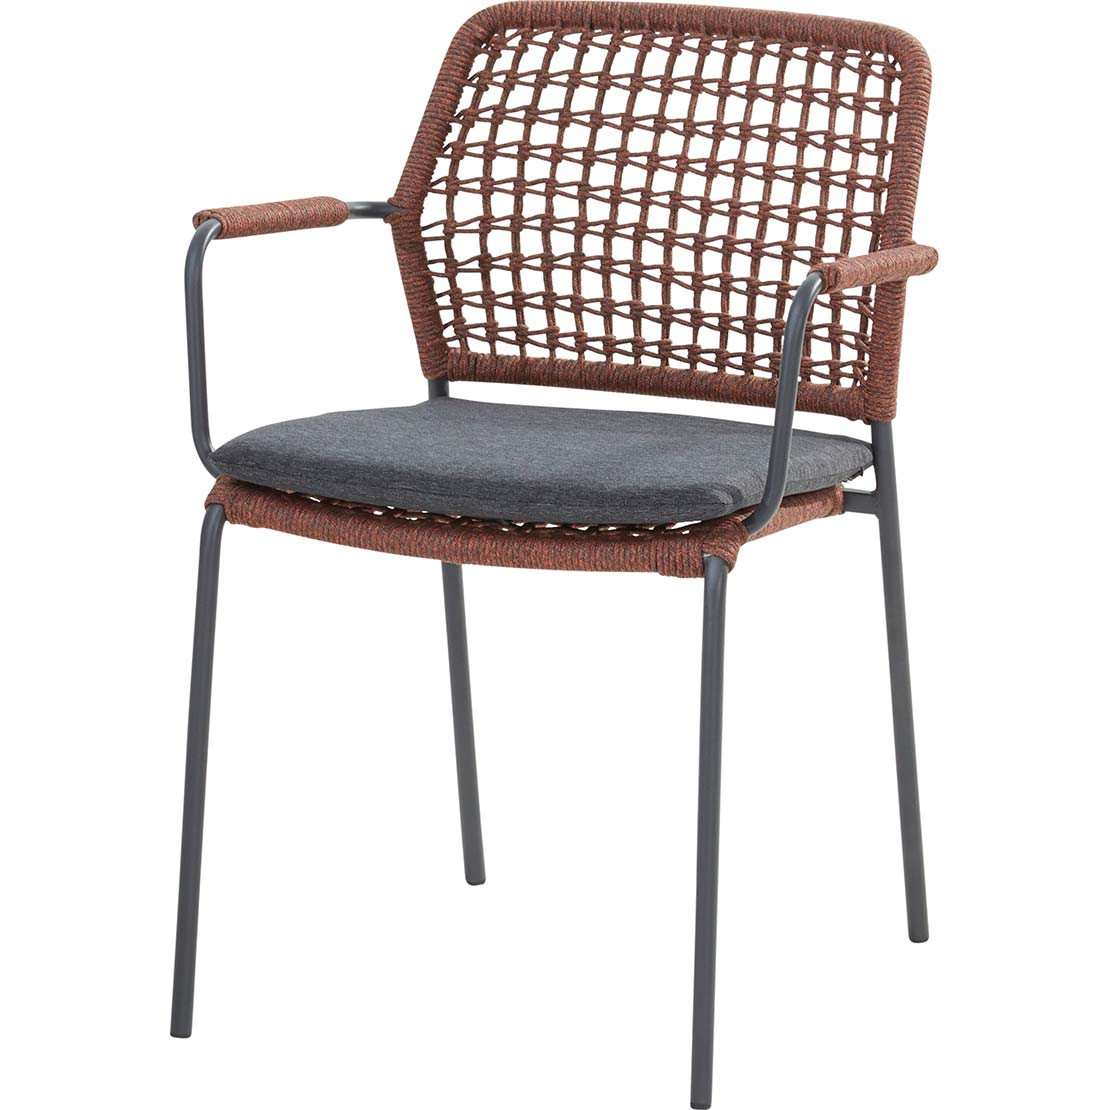 Barista stacking chair Terra Cotta with cushion